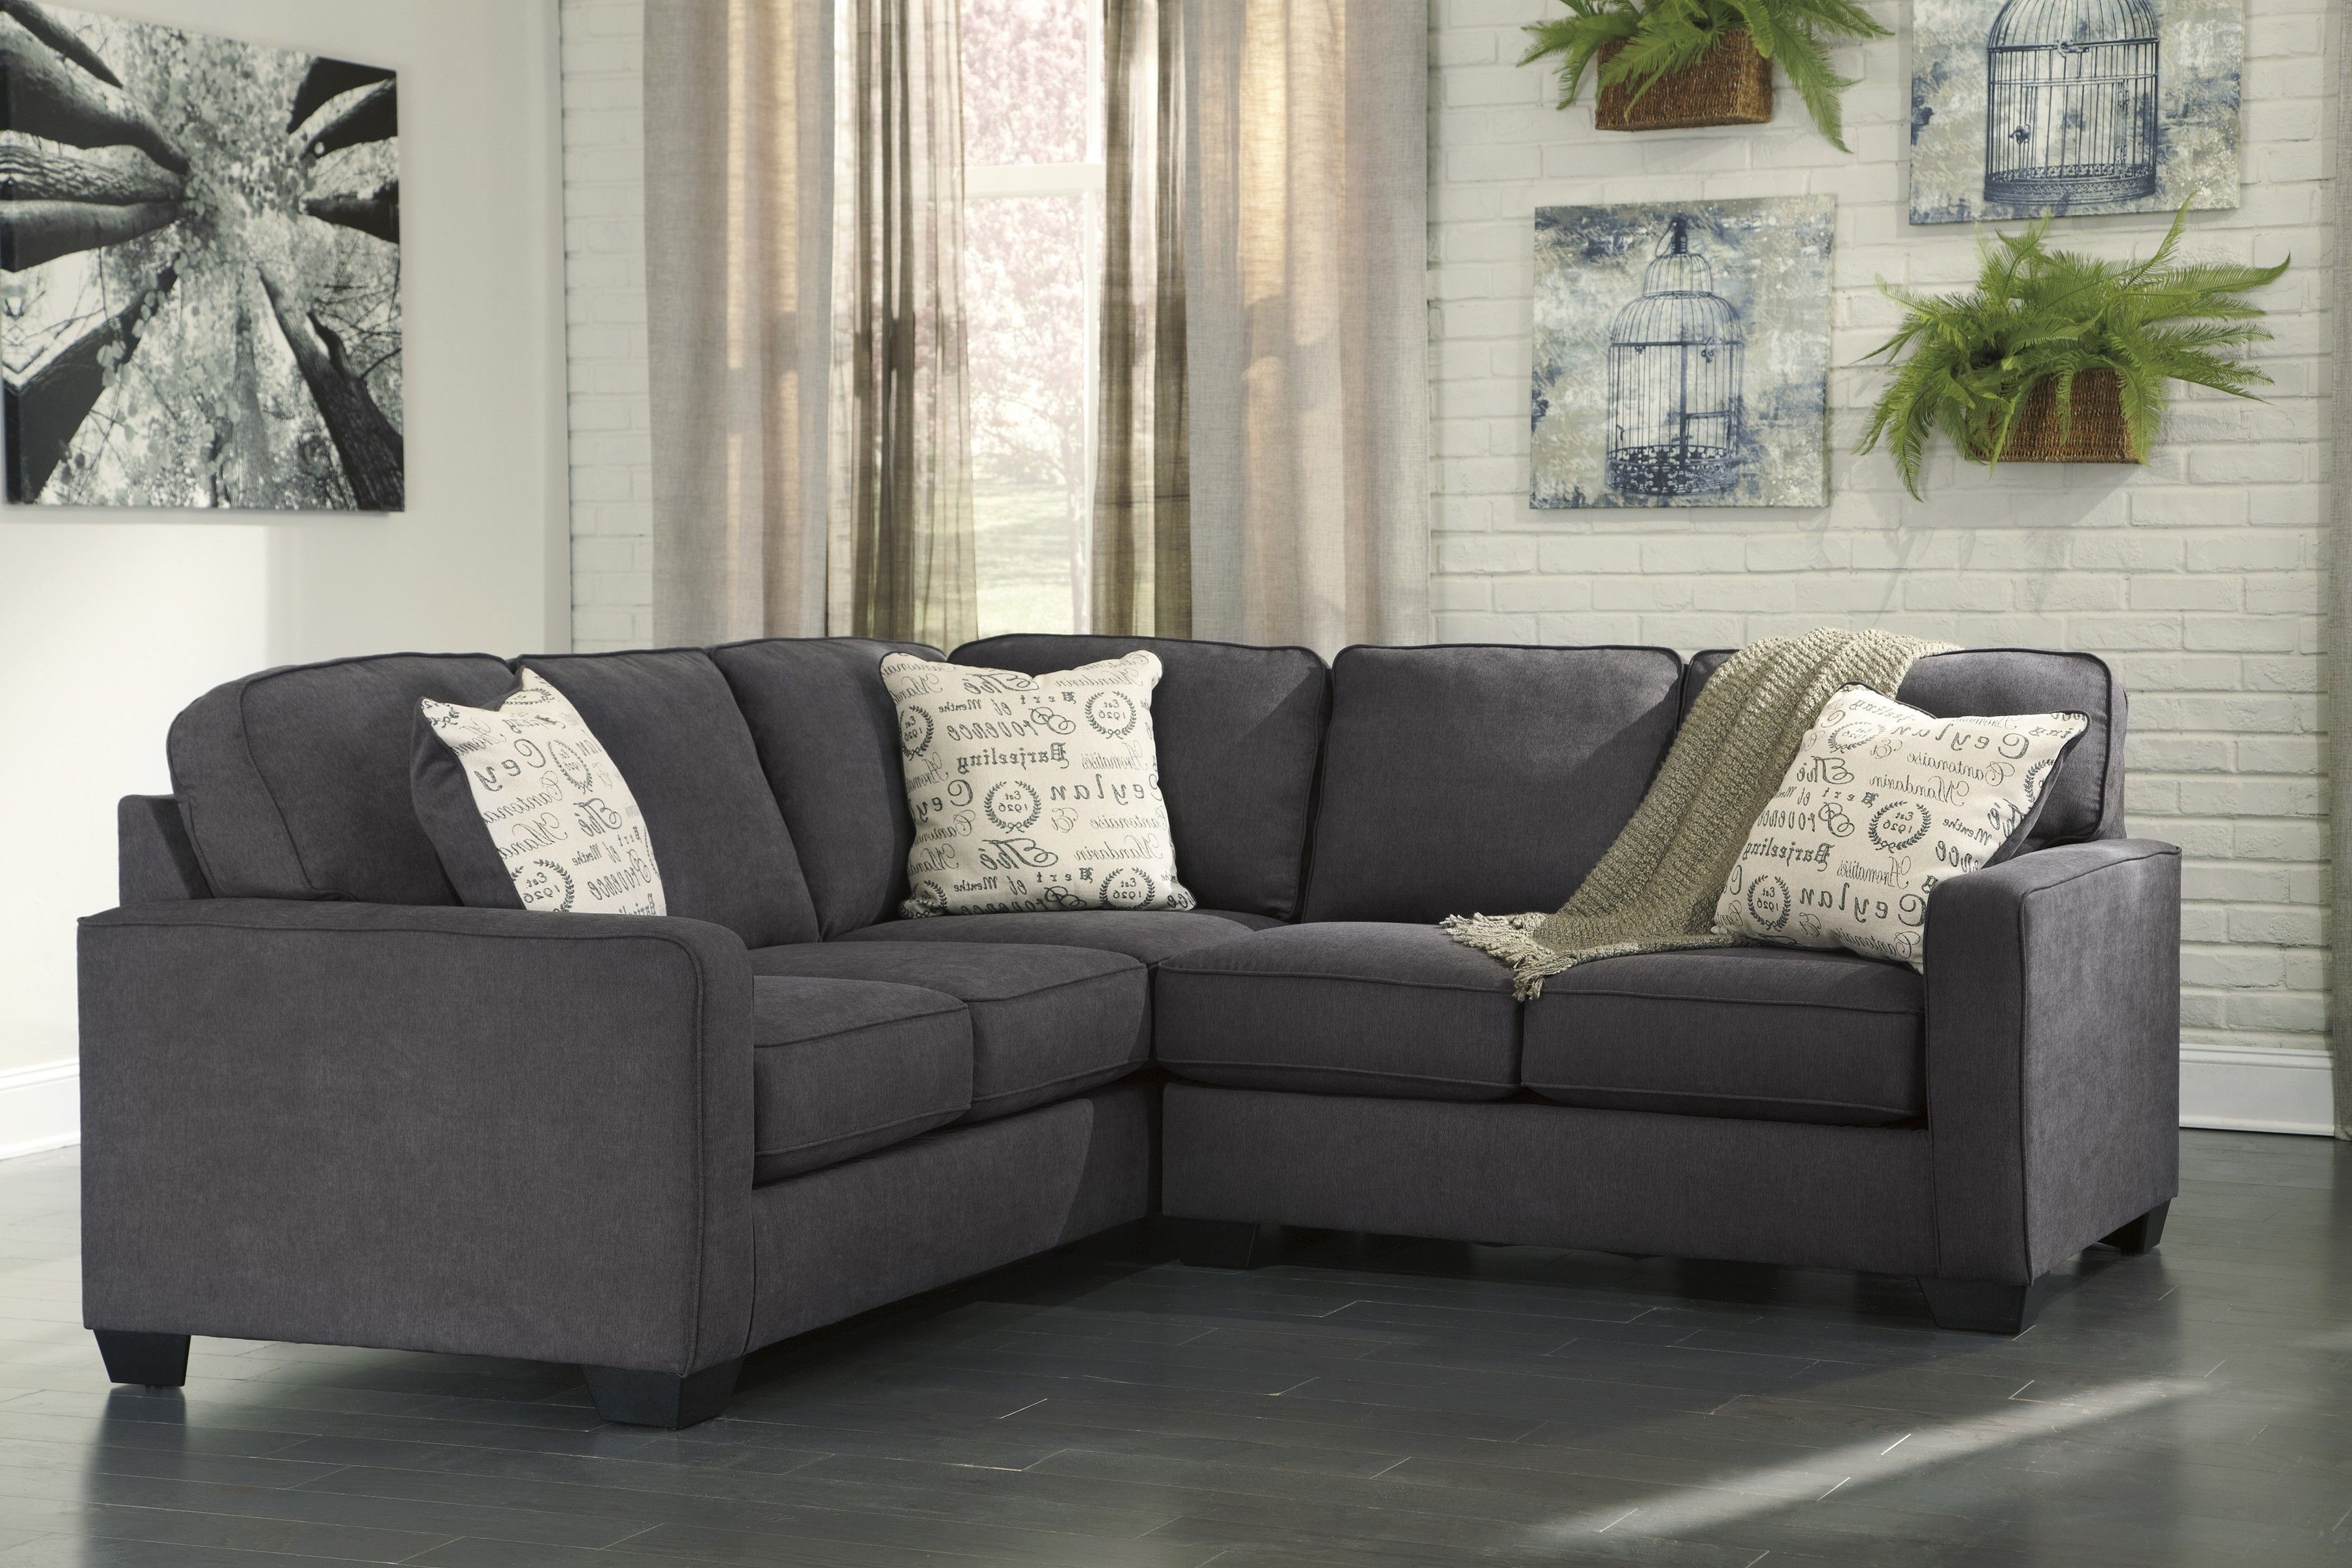 Alenya Charcoal 2 Piece Sectional Sofa For $625.00 – Furnitureusa With Elk Grove Ca Sectional Sofas (Photo 1 of 10)